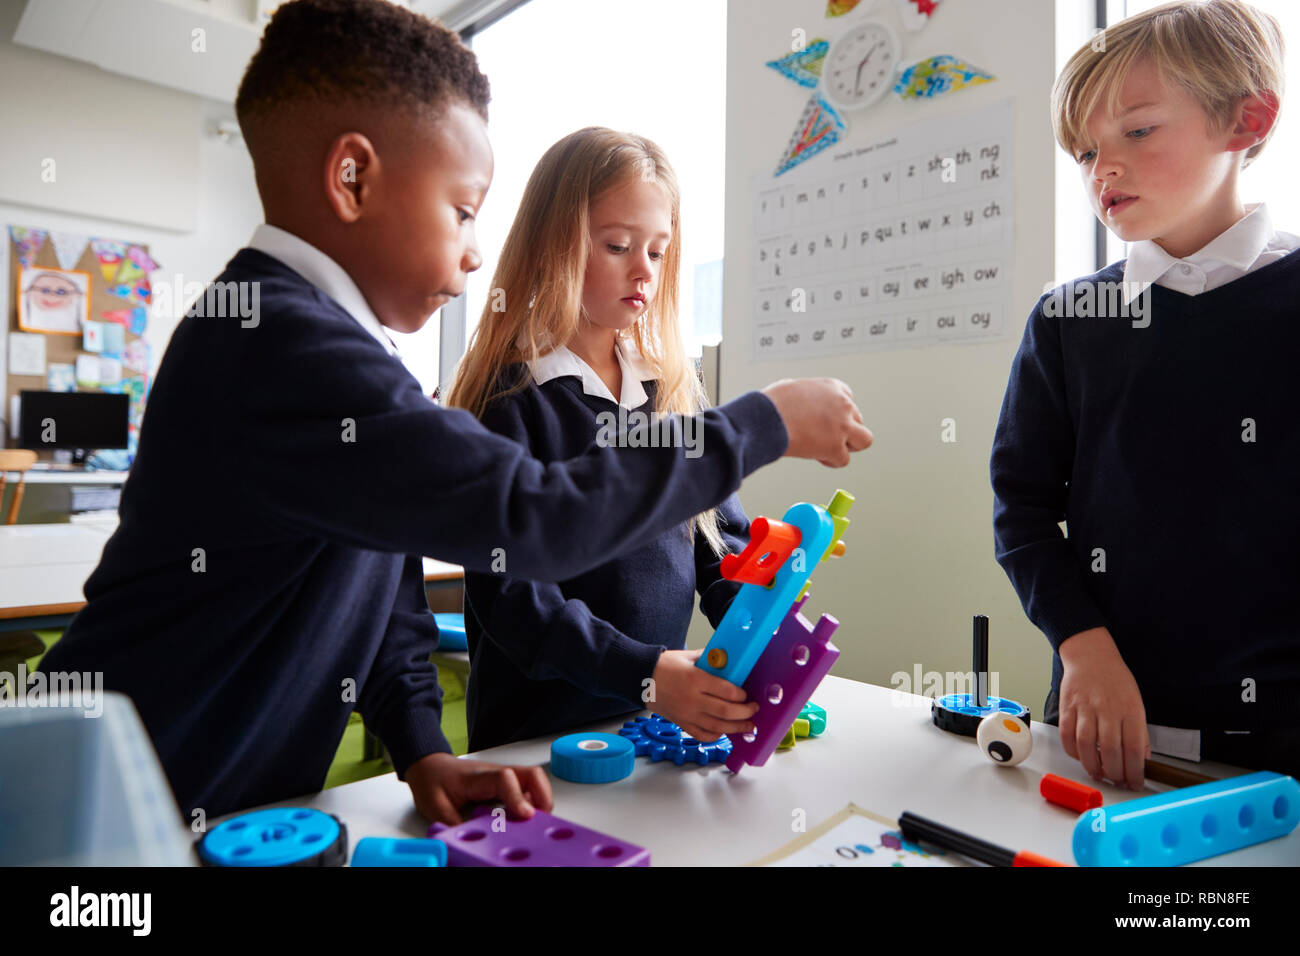 Close up of three primary school children working together with toy construction blocks in a classroom, side view Stock Photo